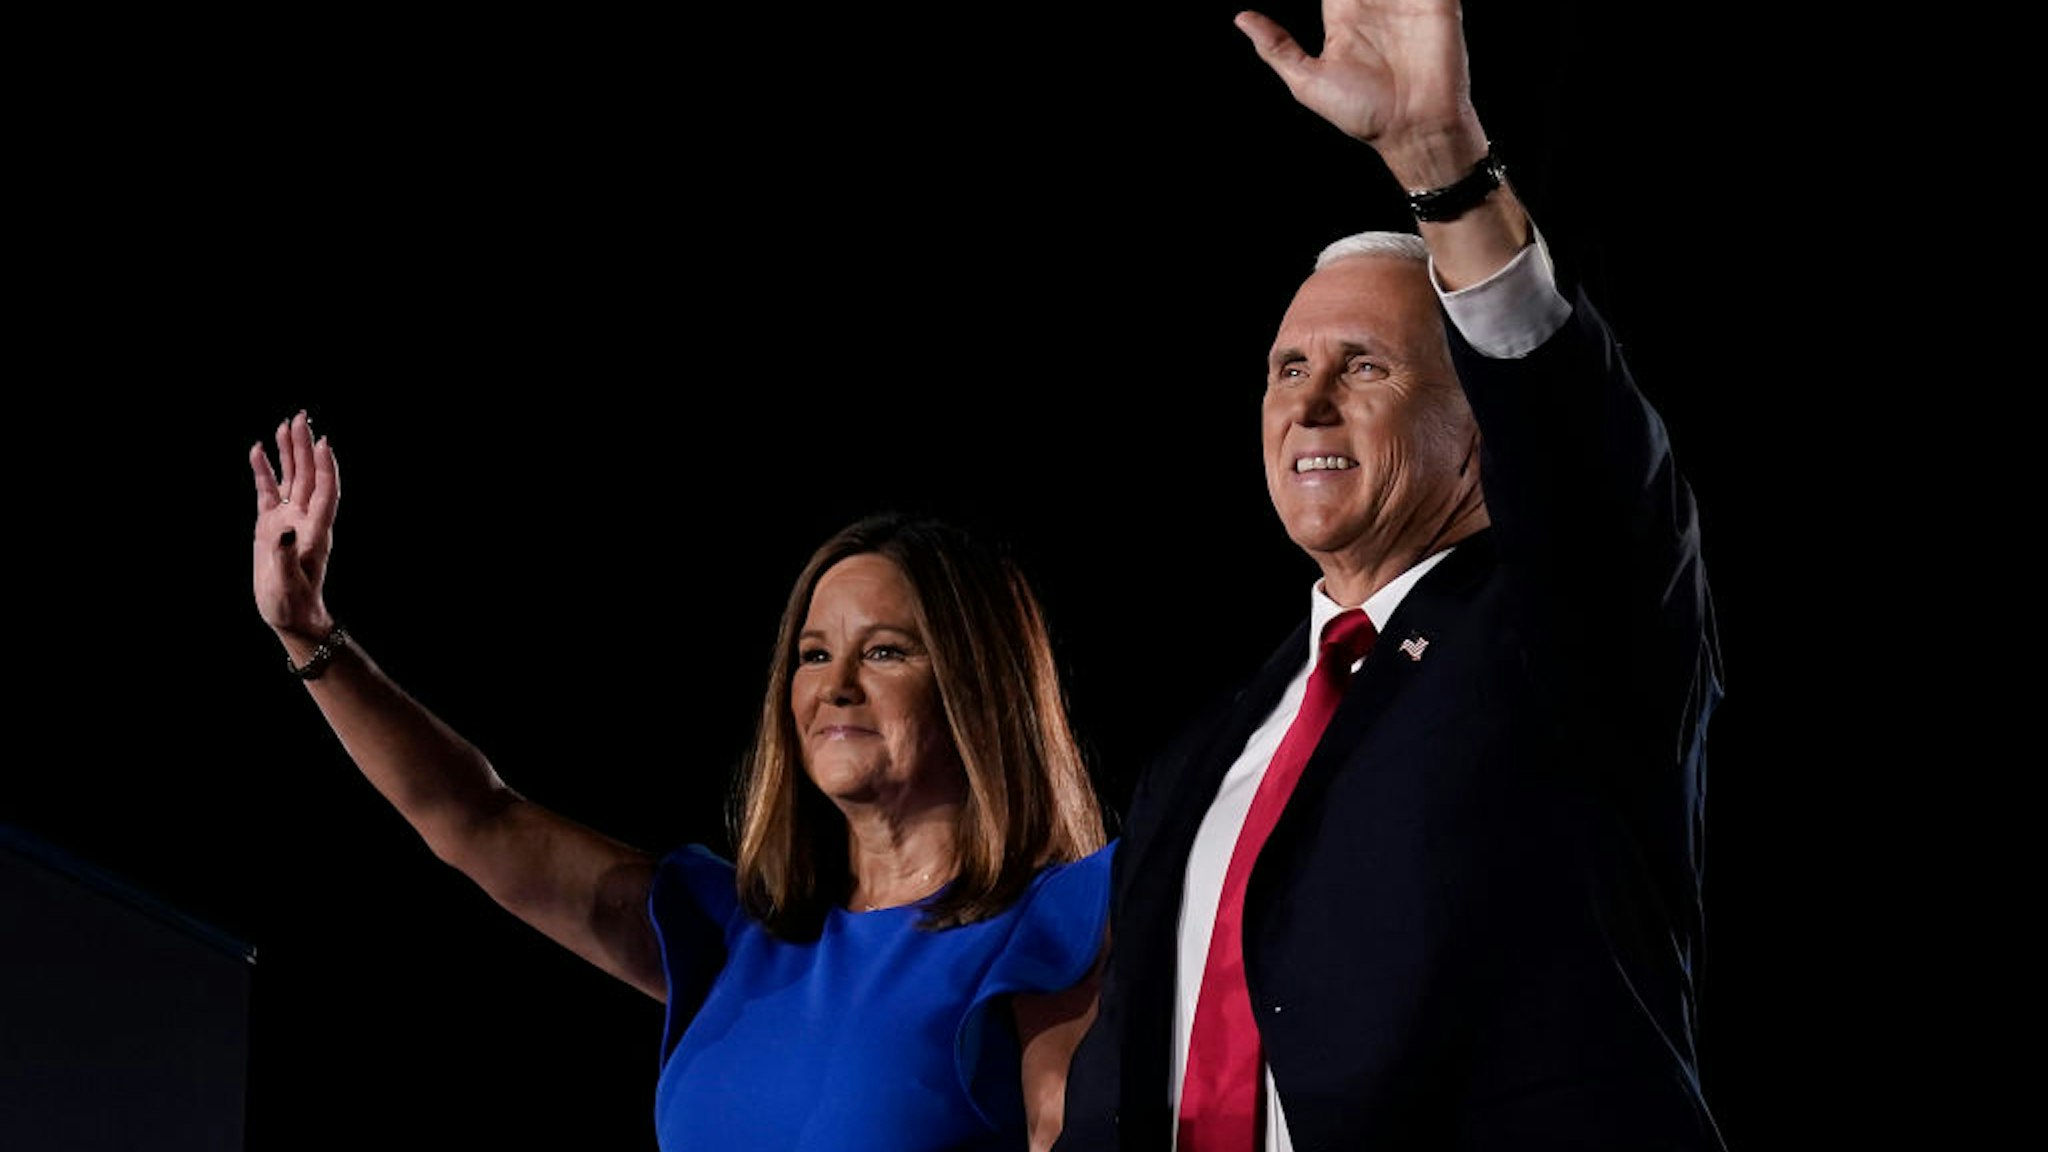 Mike Pence stands with his wife Karen Pence before accepting the vice presidential nomination during the Republican National Convention from Fort McHenry National Monument on August 26, 2020 in Baltimore, Maryland.